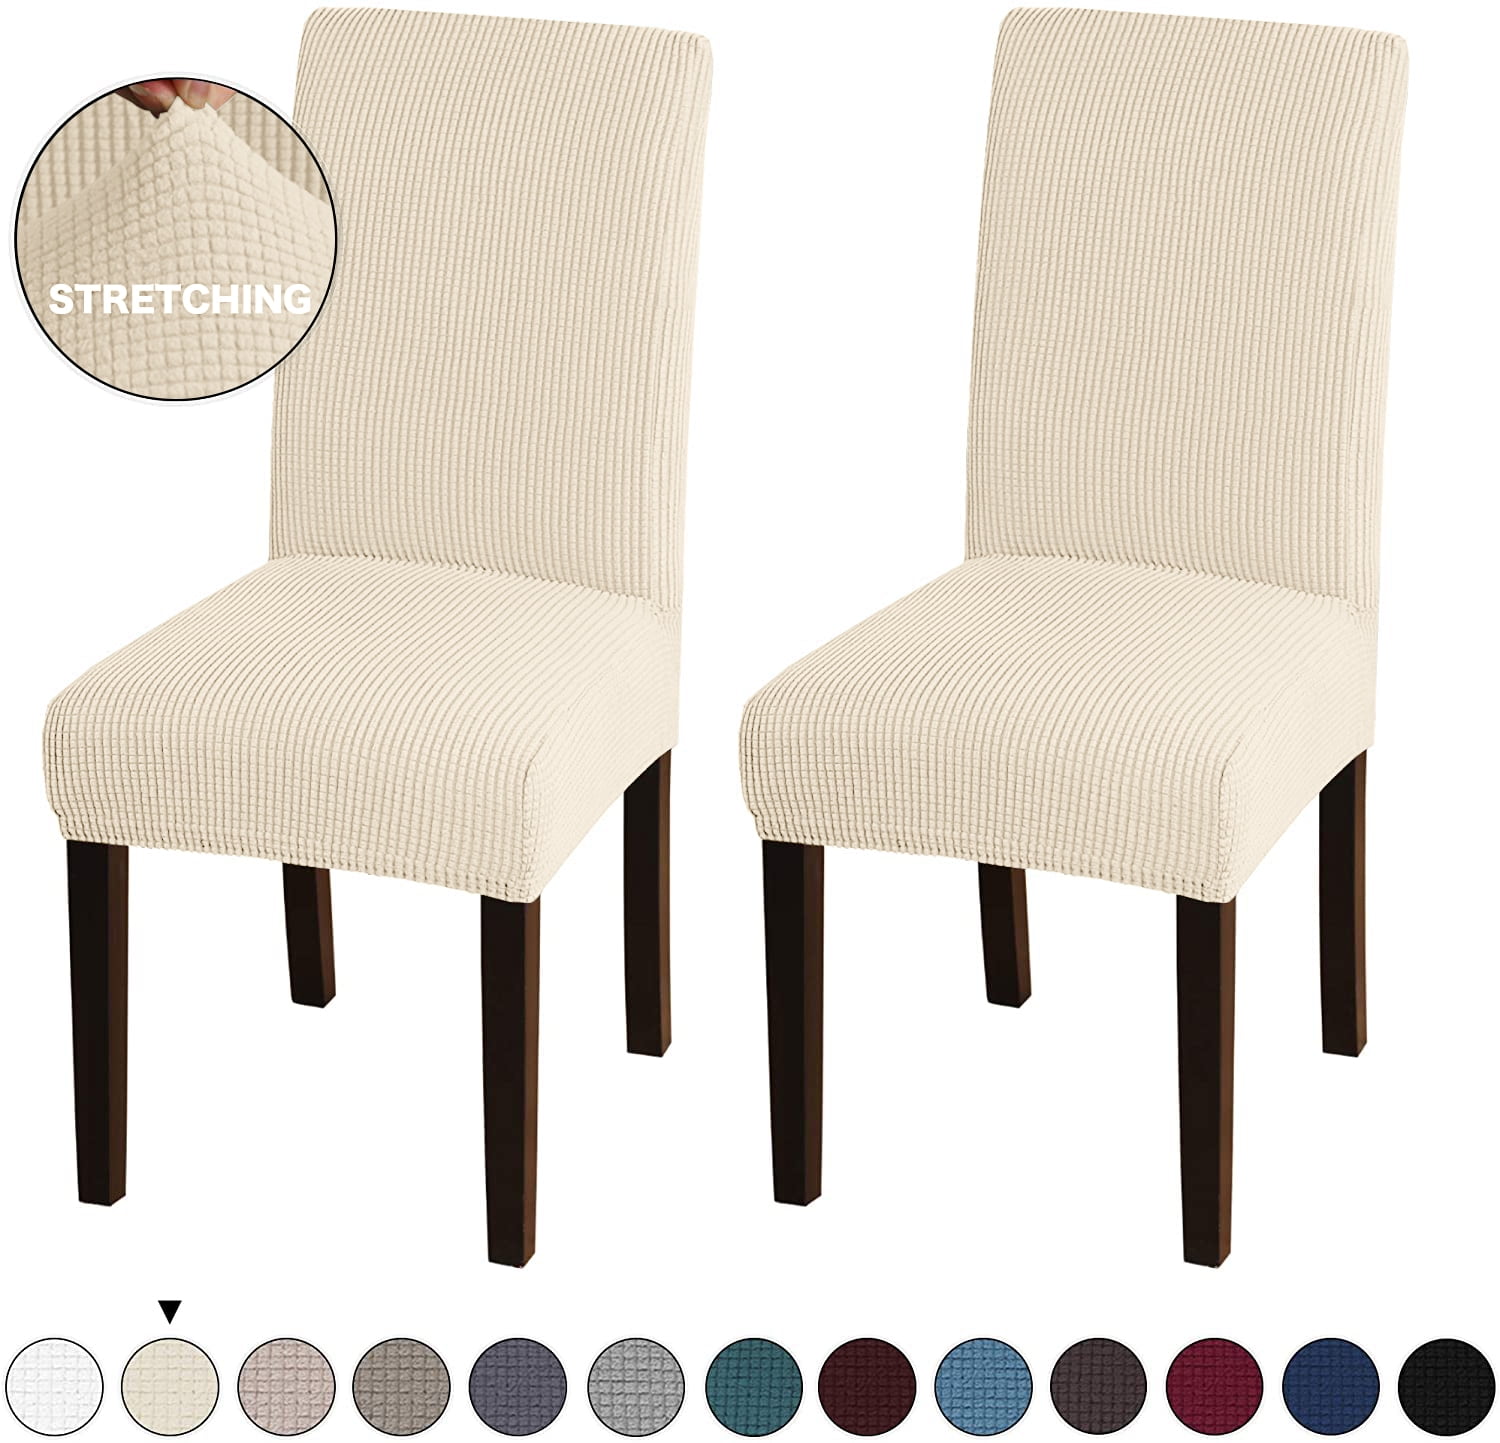 Lnkoo 2 Pack Dining Room Chair Slipcovers Dining Chair Covers Parsons Chair Slipcover Stretch Chair Covers For Dining Room Hotel Ceremony Walmart Com Walmart Com